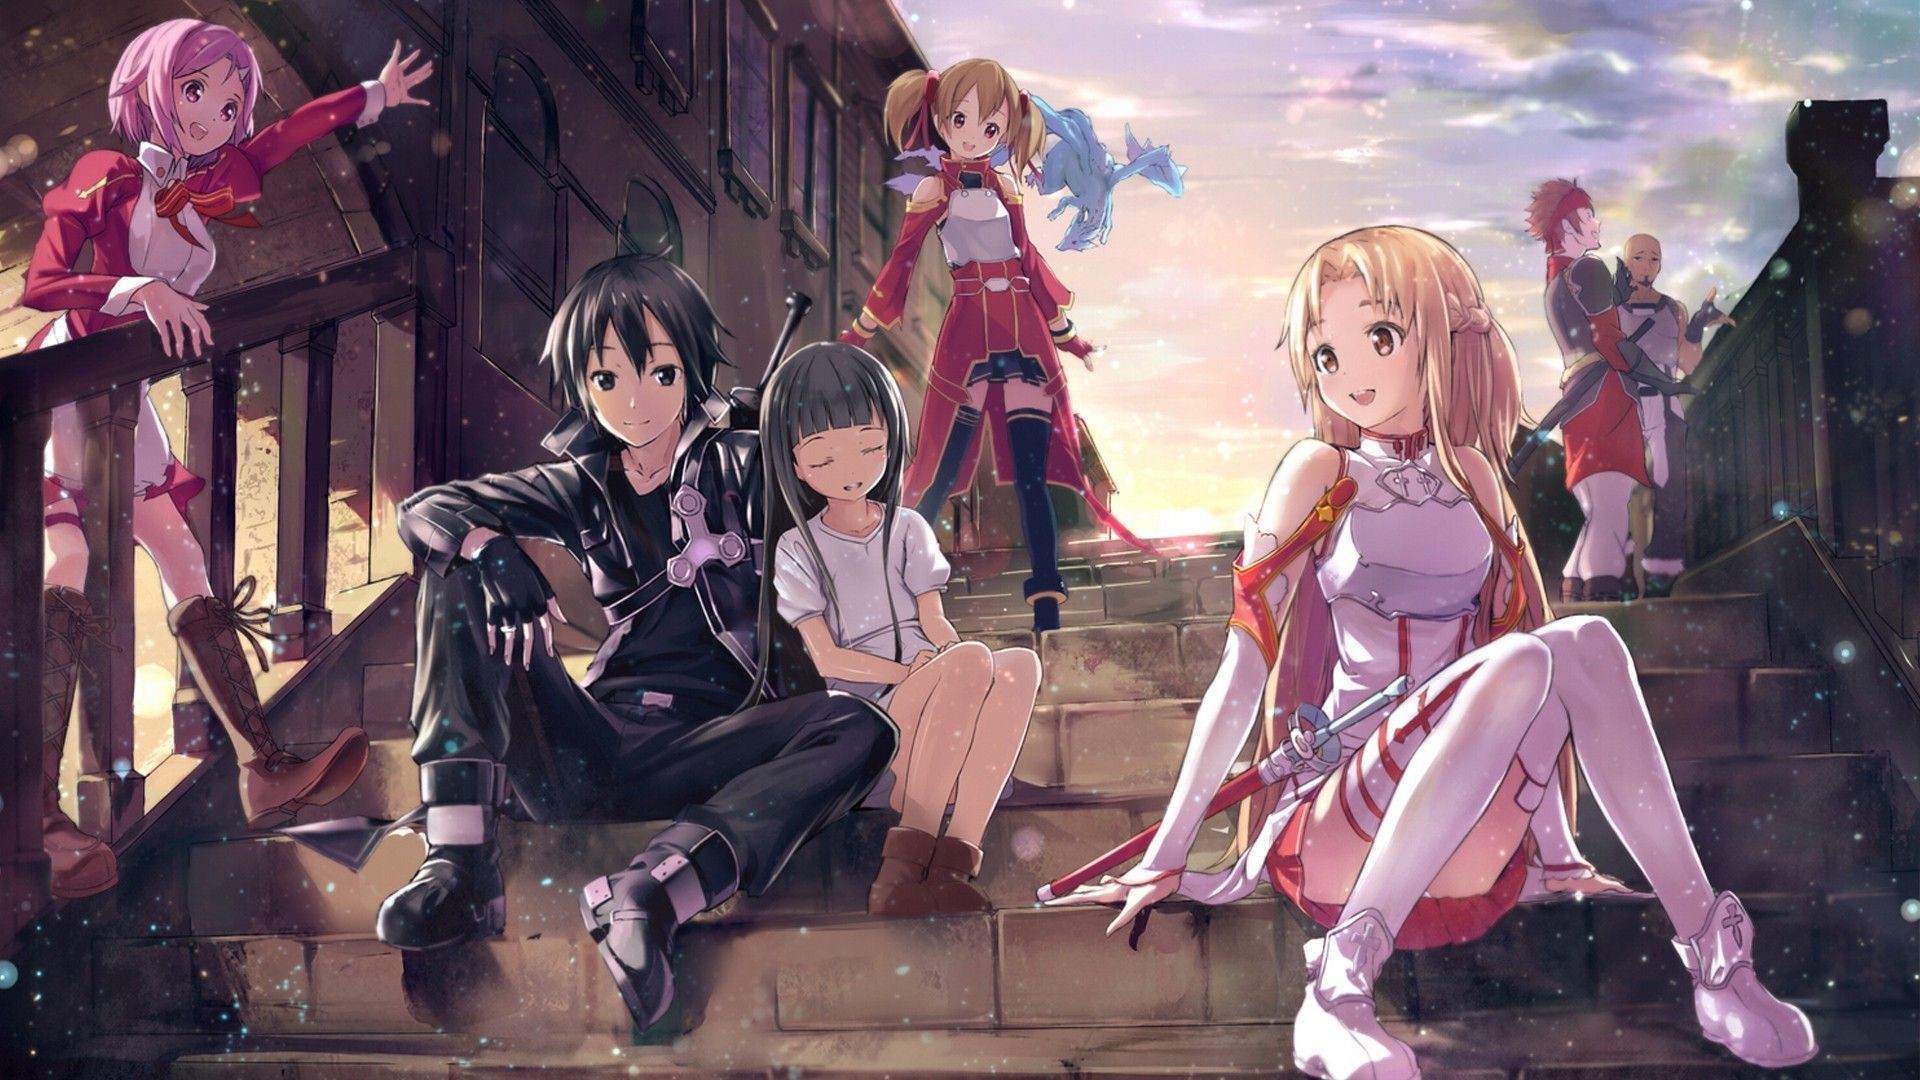 2600+ Sword Art Online HD Wallpapers and Backgrounds